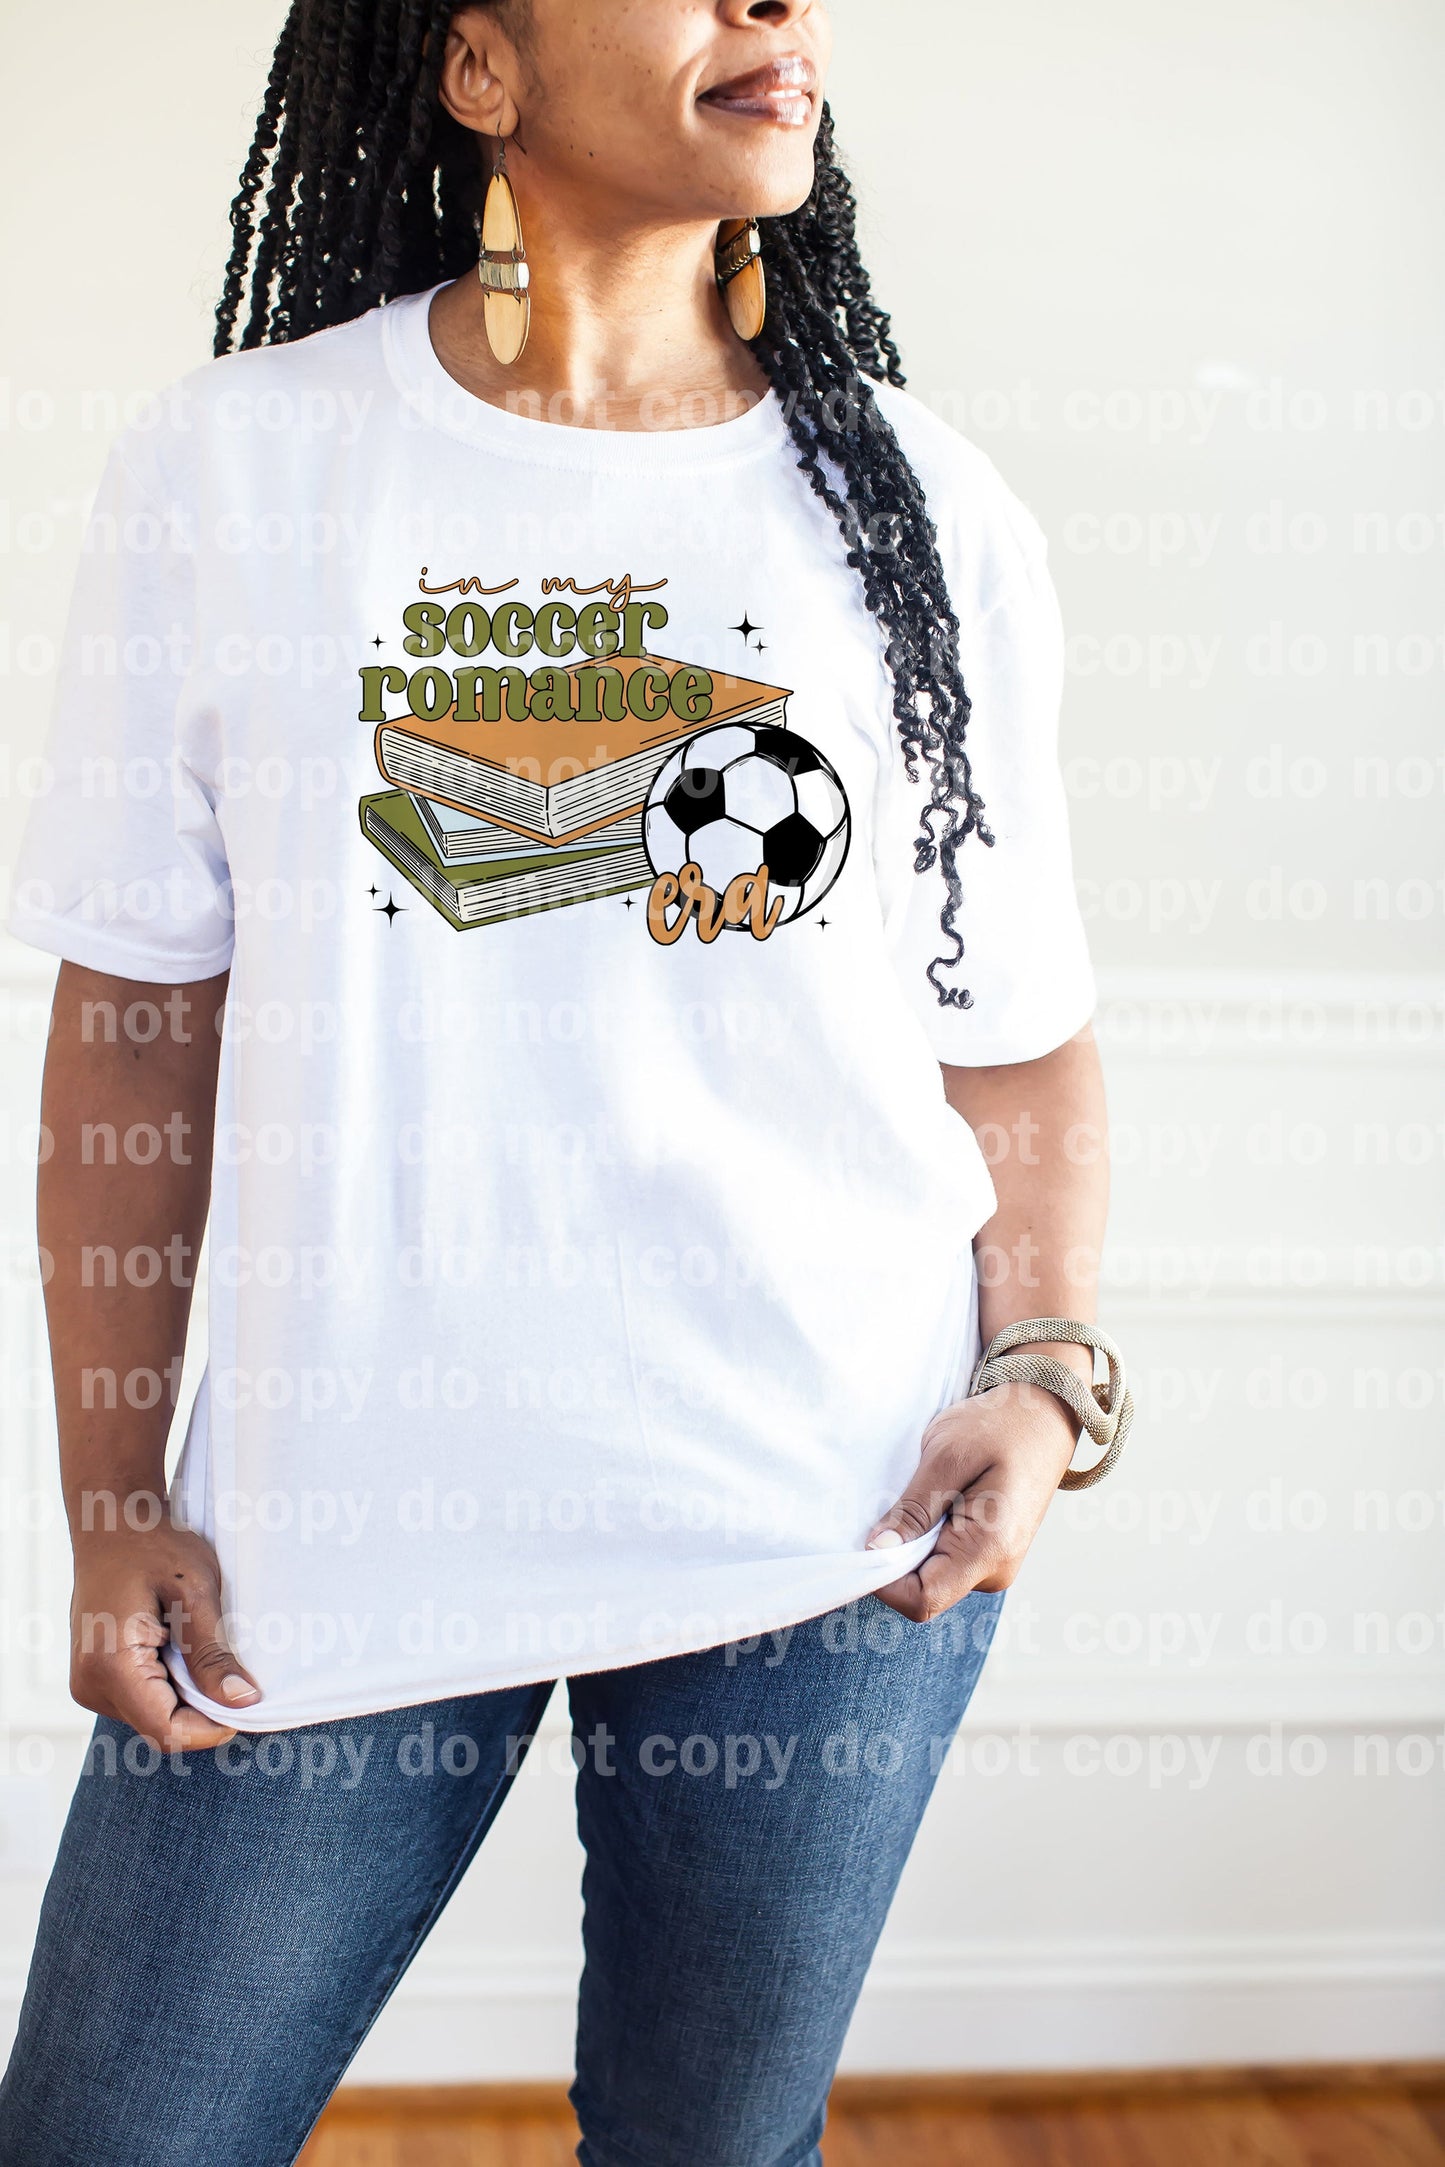 In My Soccer Romance Era Dream Print or Sublimation Print